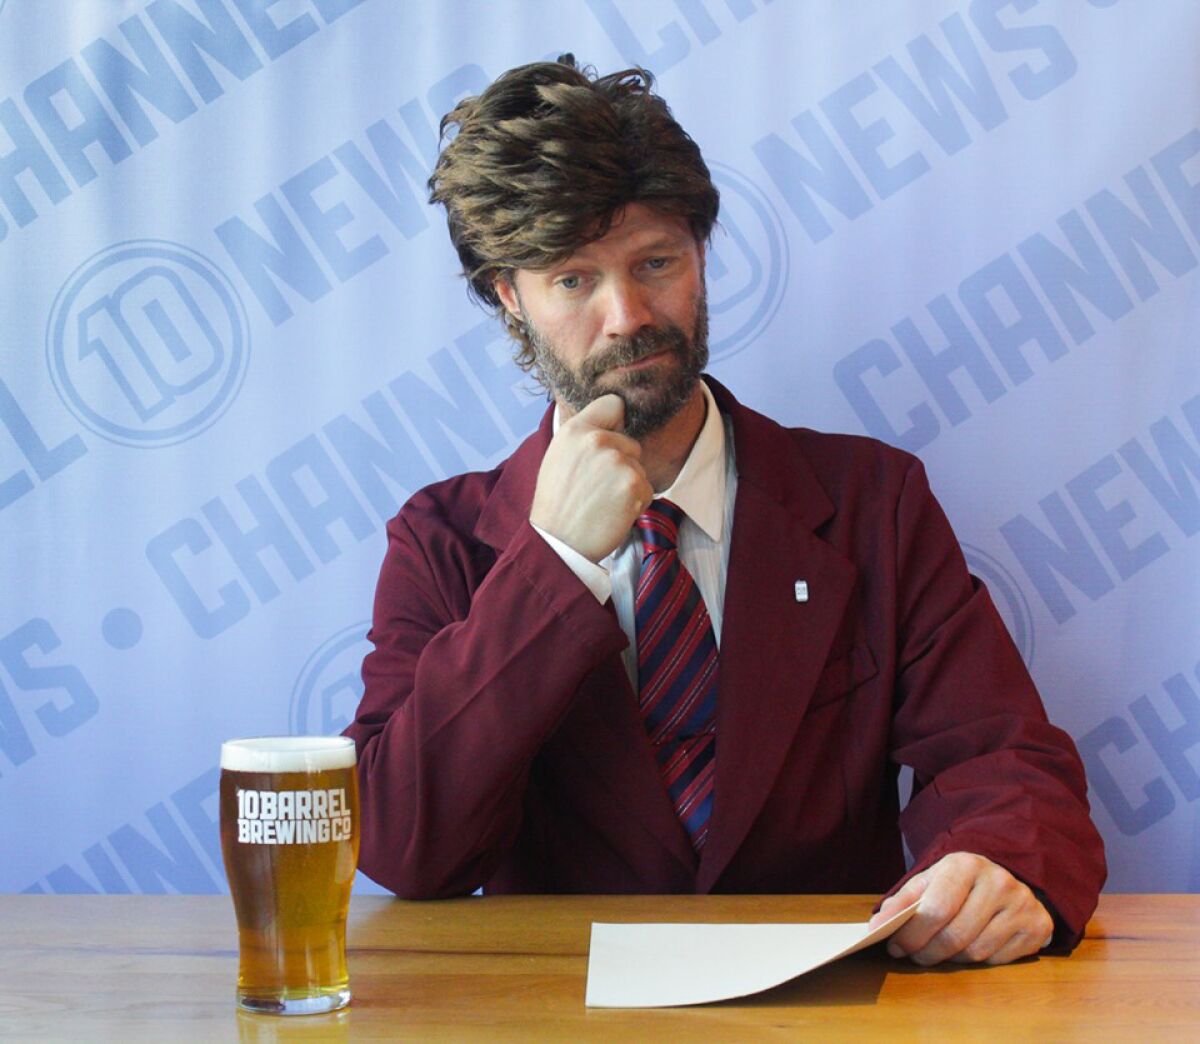 10 Barrel Brewing Co. brewmaster Ben Shirley as Ron Burgundy from Anchorman.